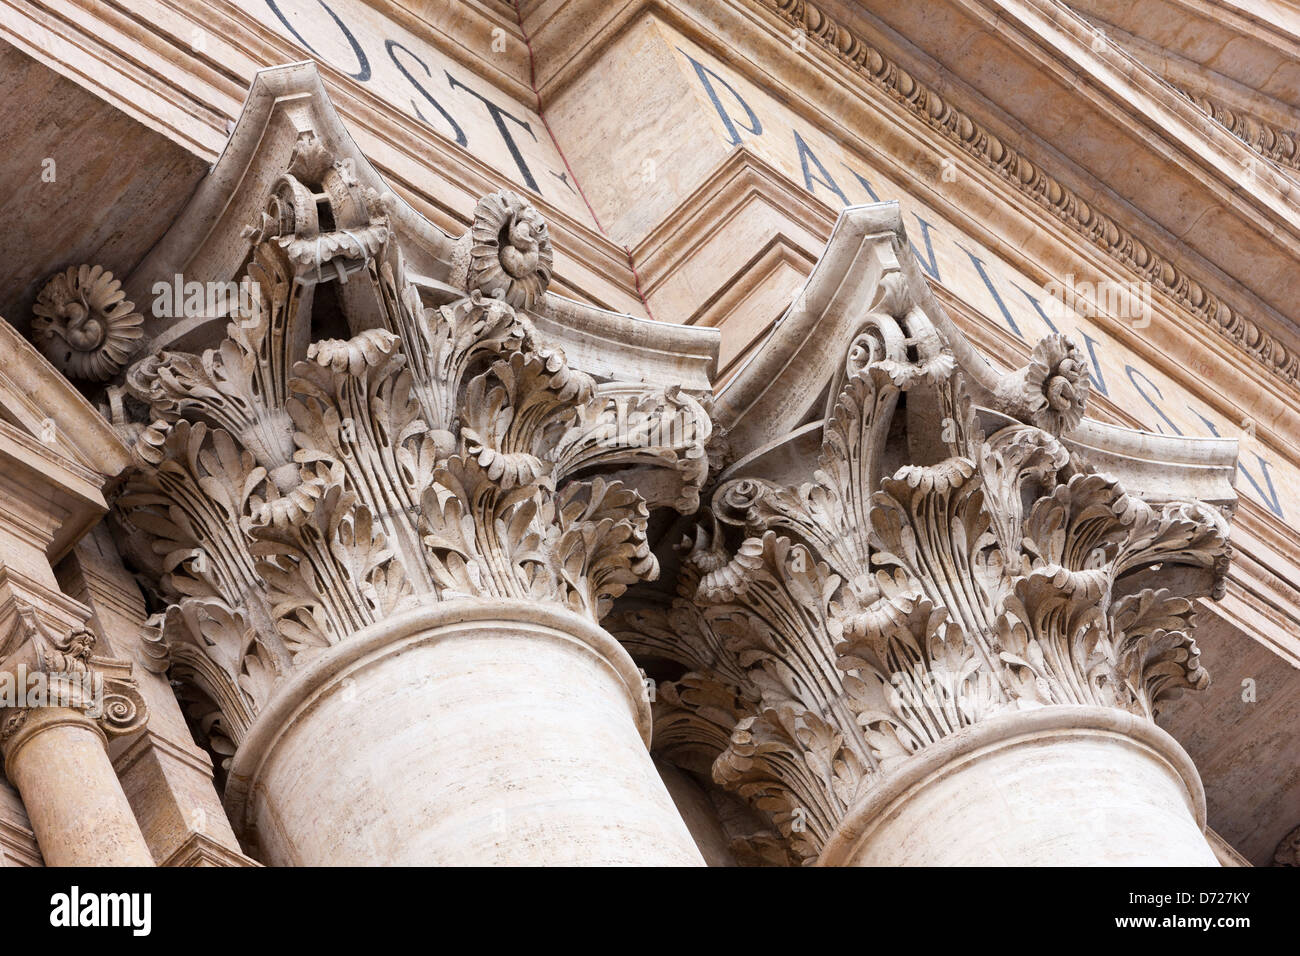 Close up of the capitals of Corinthian columns of St Peter's Basilica, St. Peter's Square, Vatican City, Rome Stock Photo